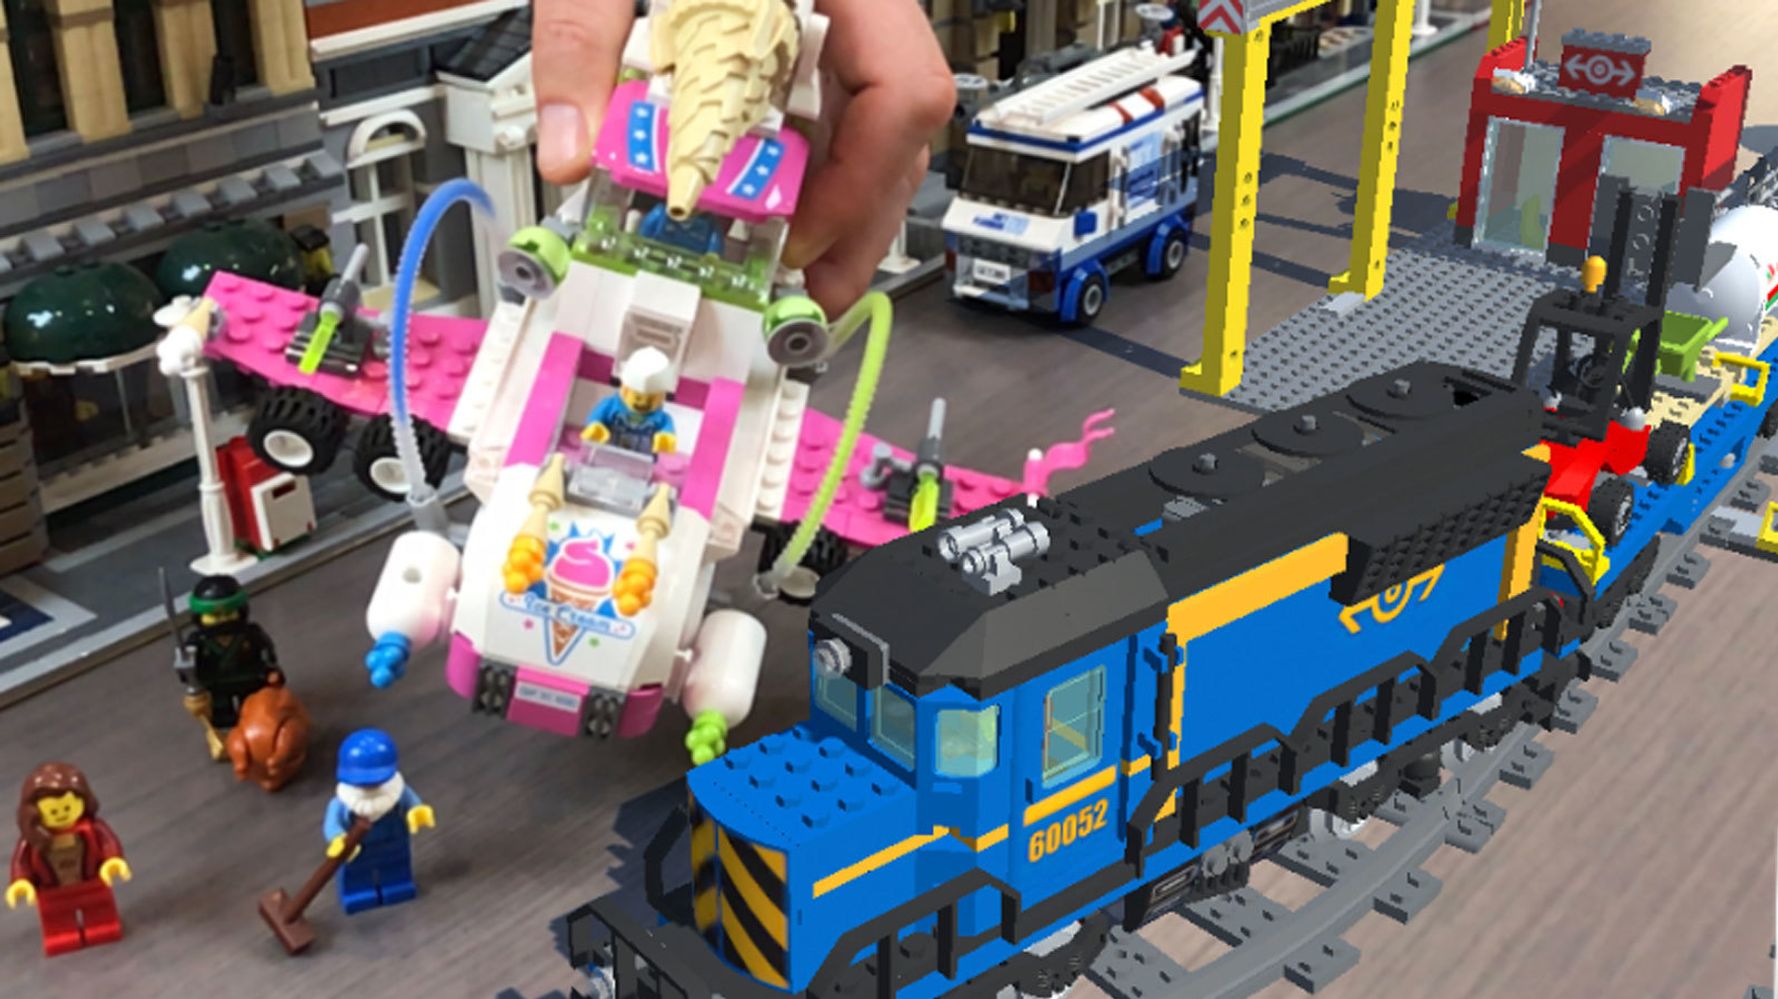 Lego Enters Reality With New App That Interacts With Playsets | HuffPost Contributor